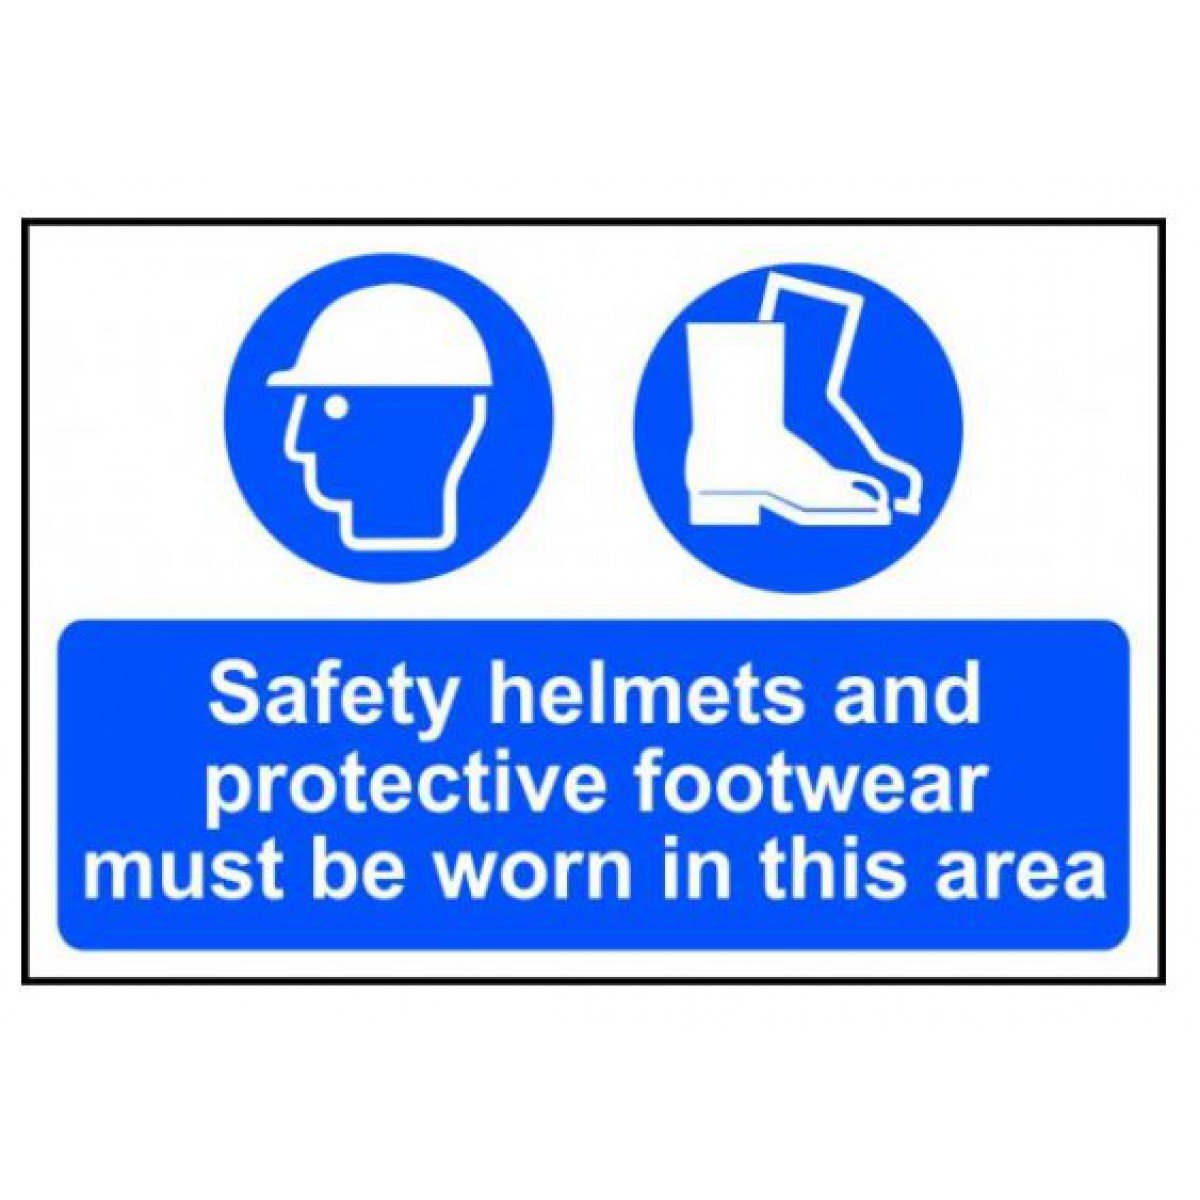 Sign-Safety helmets and protective footwear must be worn in this